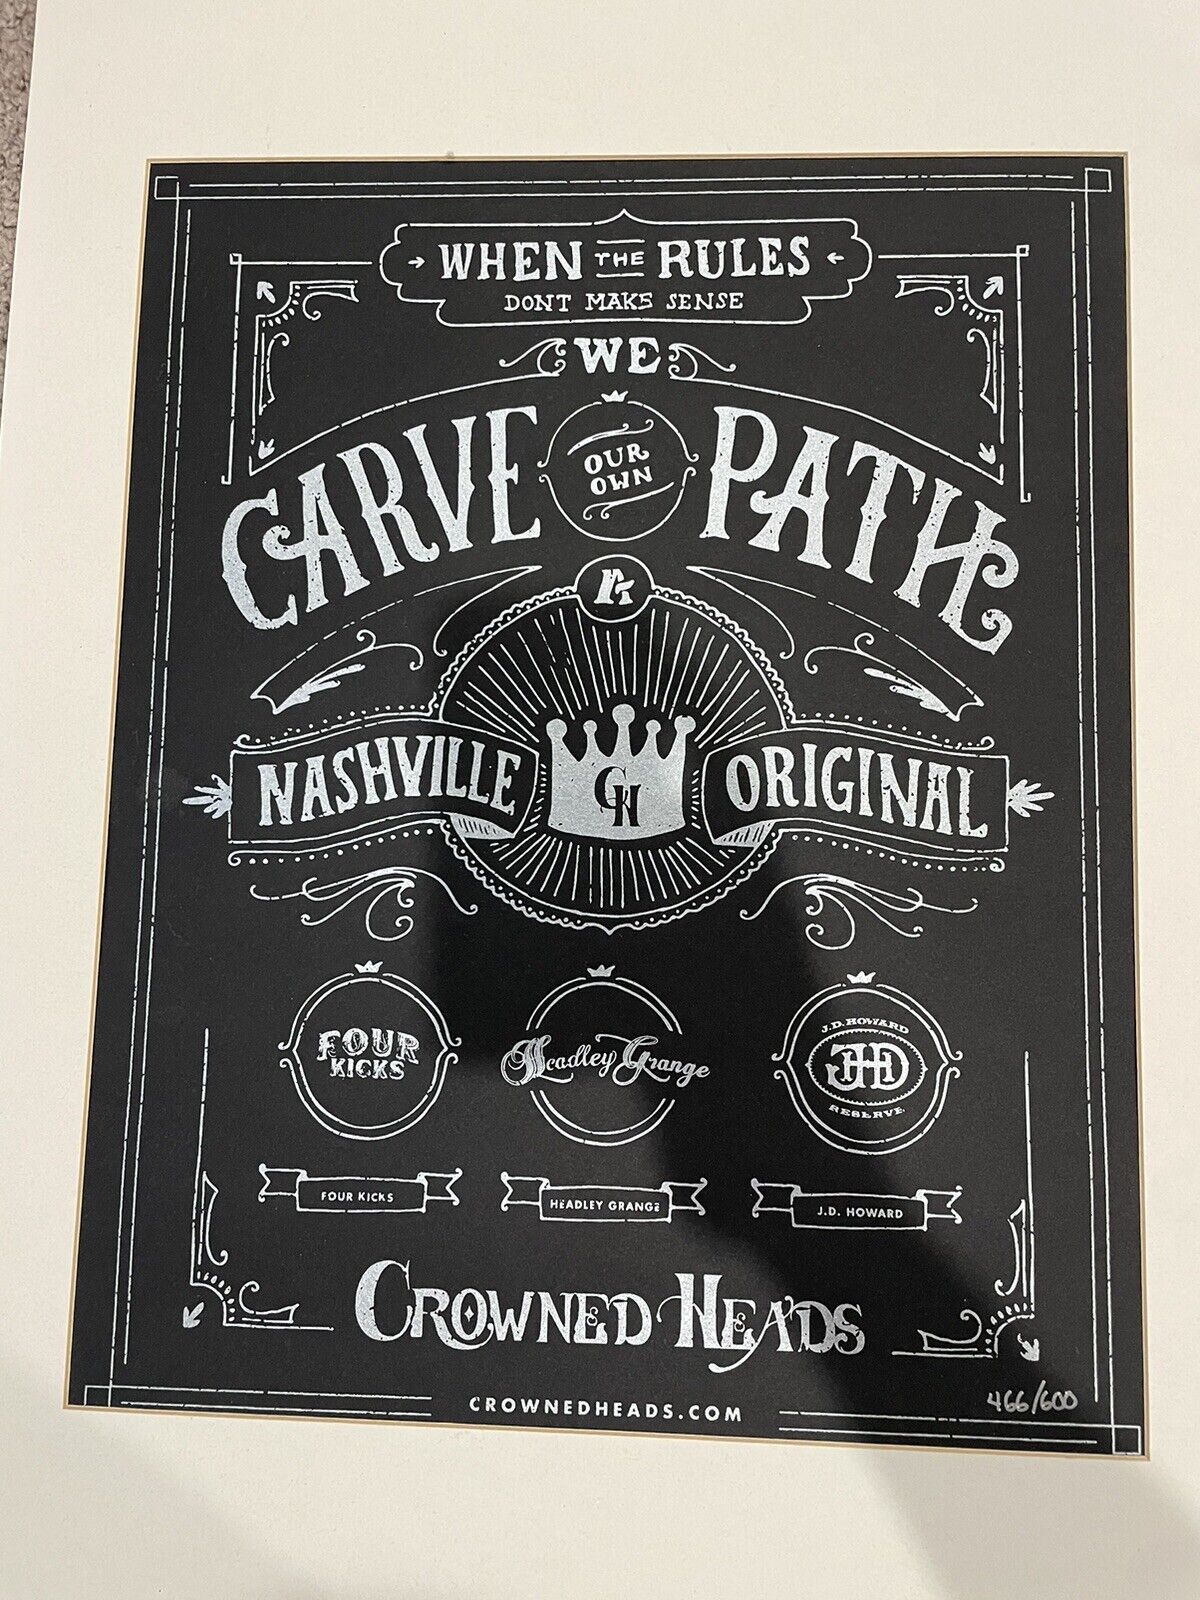 Two Limited Hand Numbered cigar poster from Crowned Heads Co - Rare Collectible